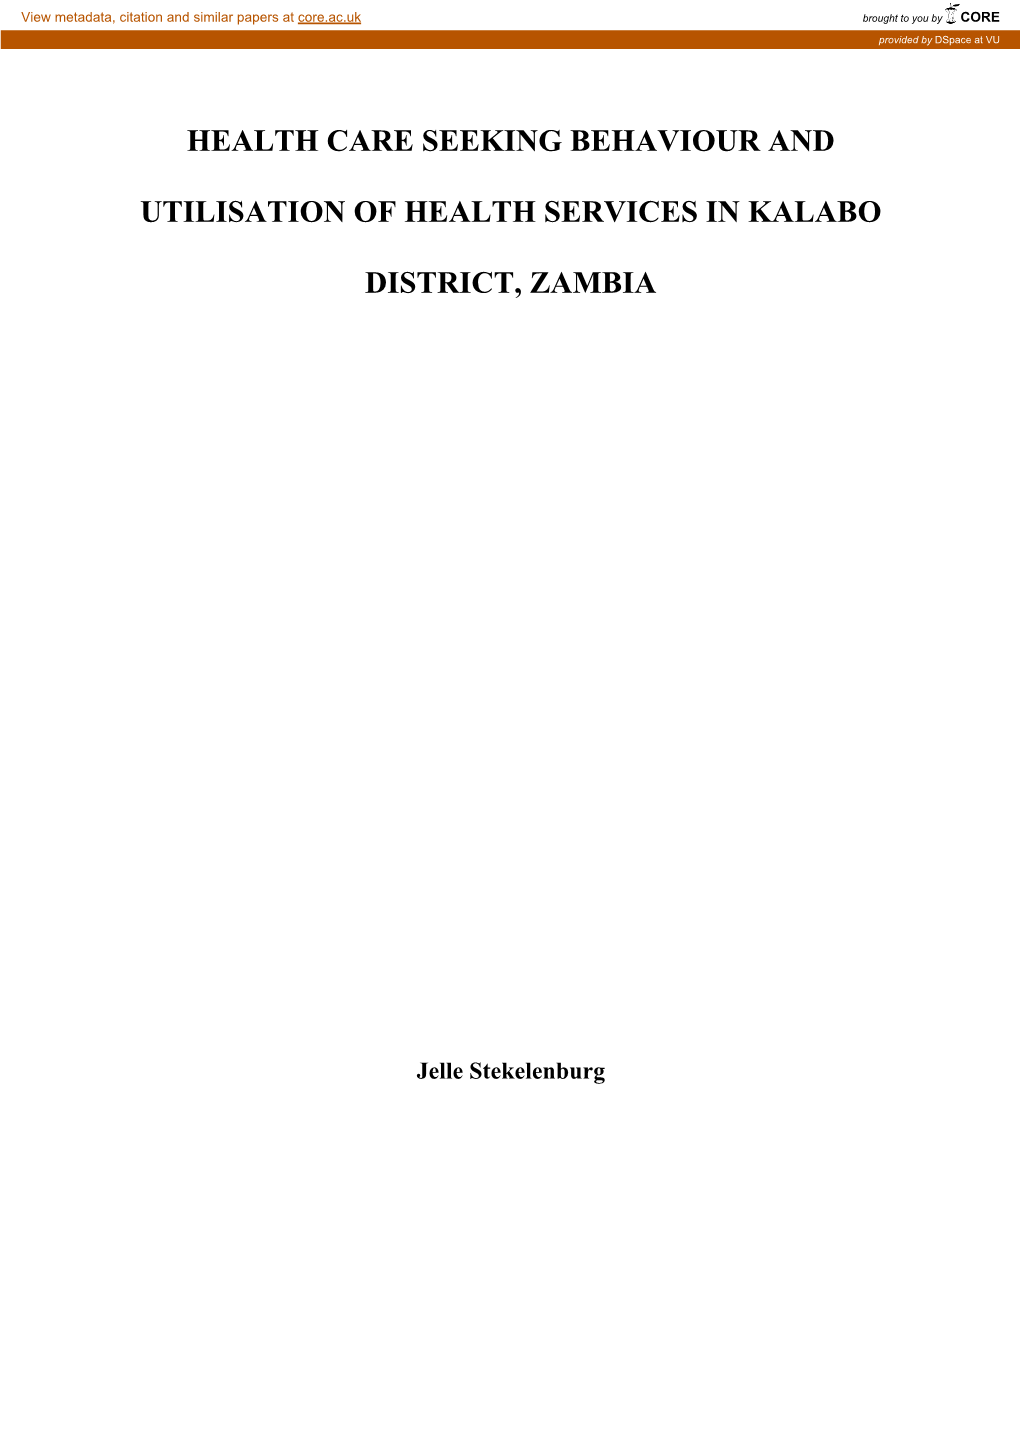 Health Care Seeking Behaviour and Utilisation of Health Services in Kalabo District, Zambia